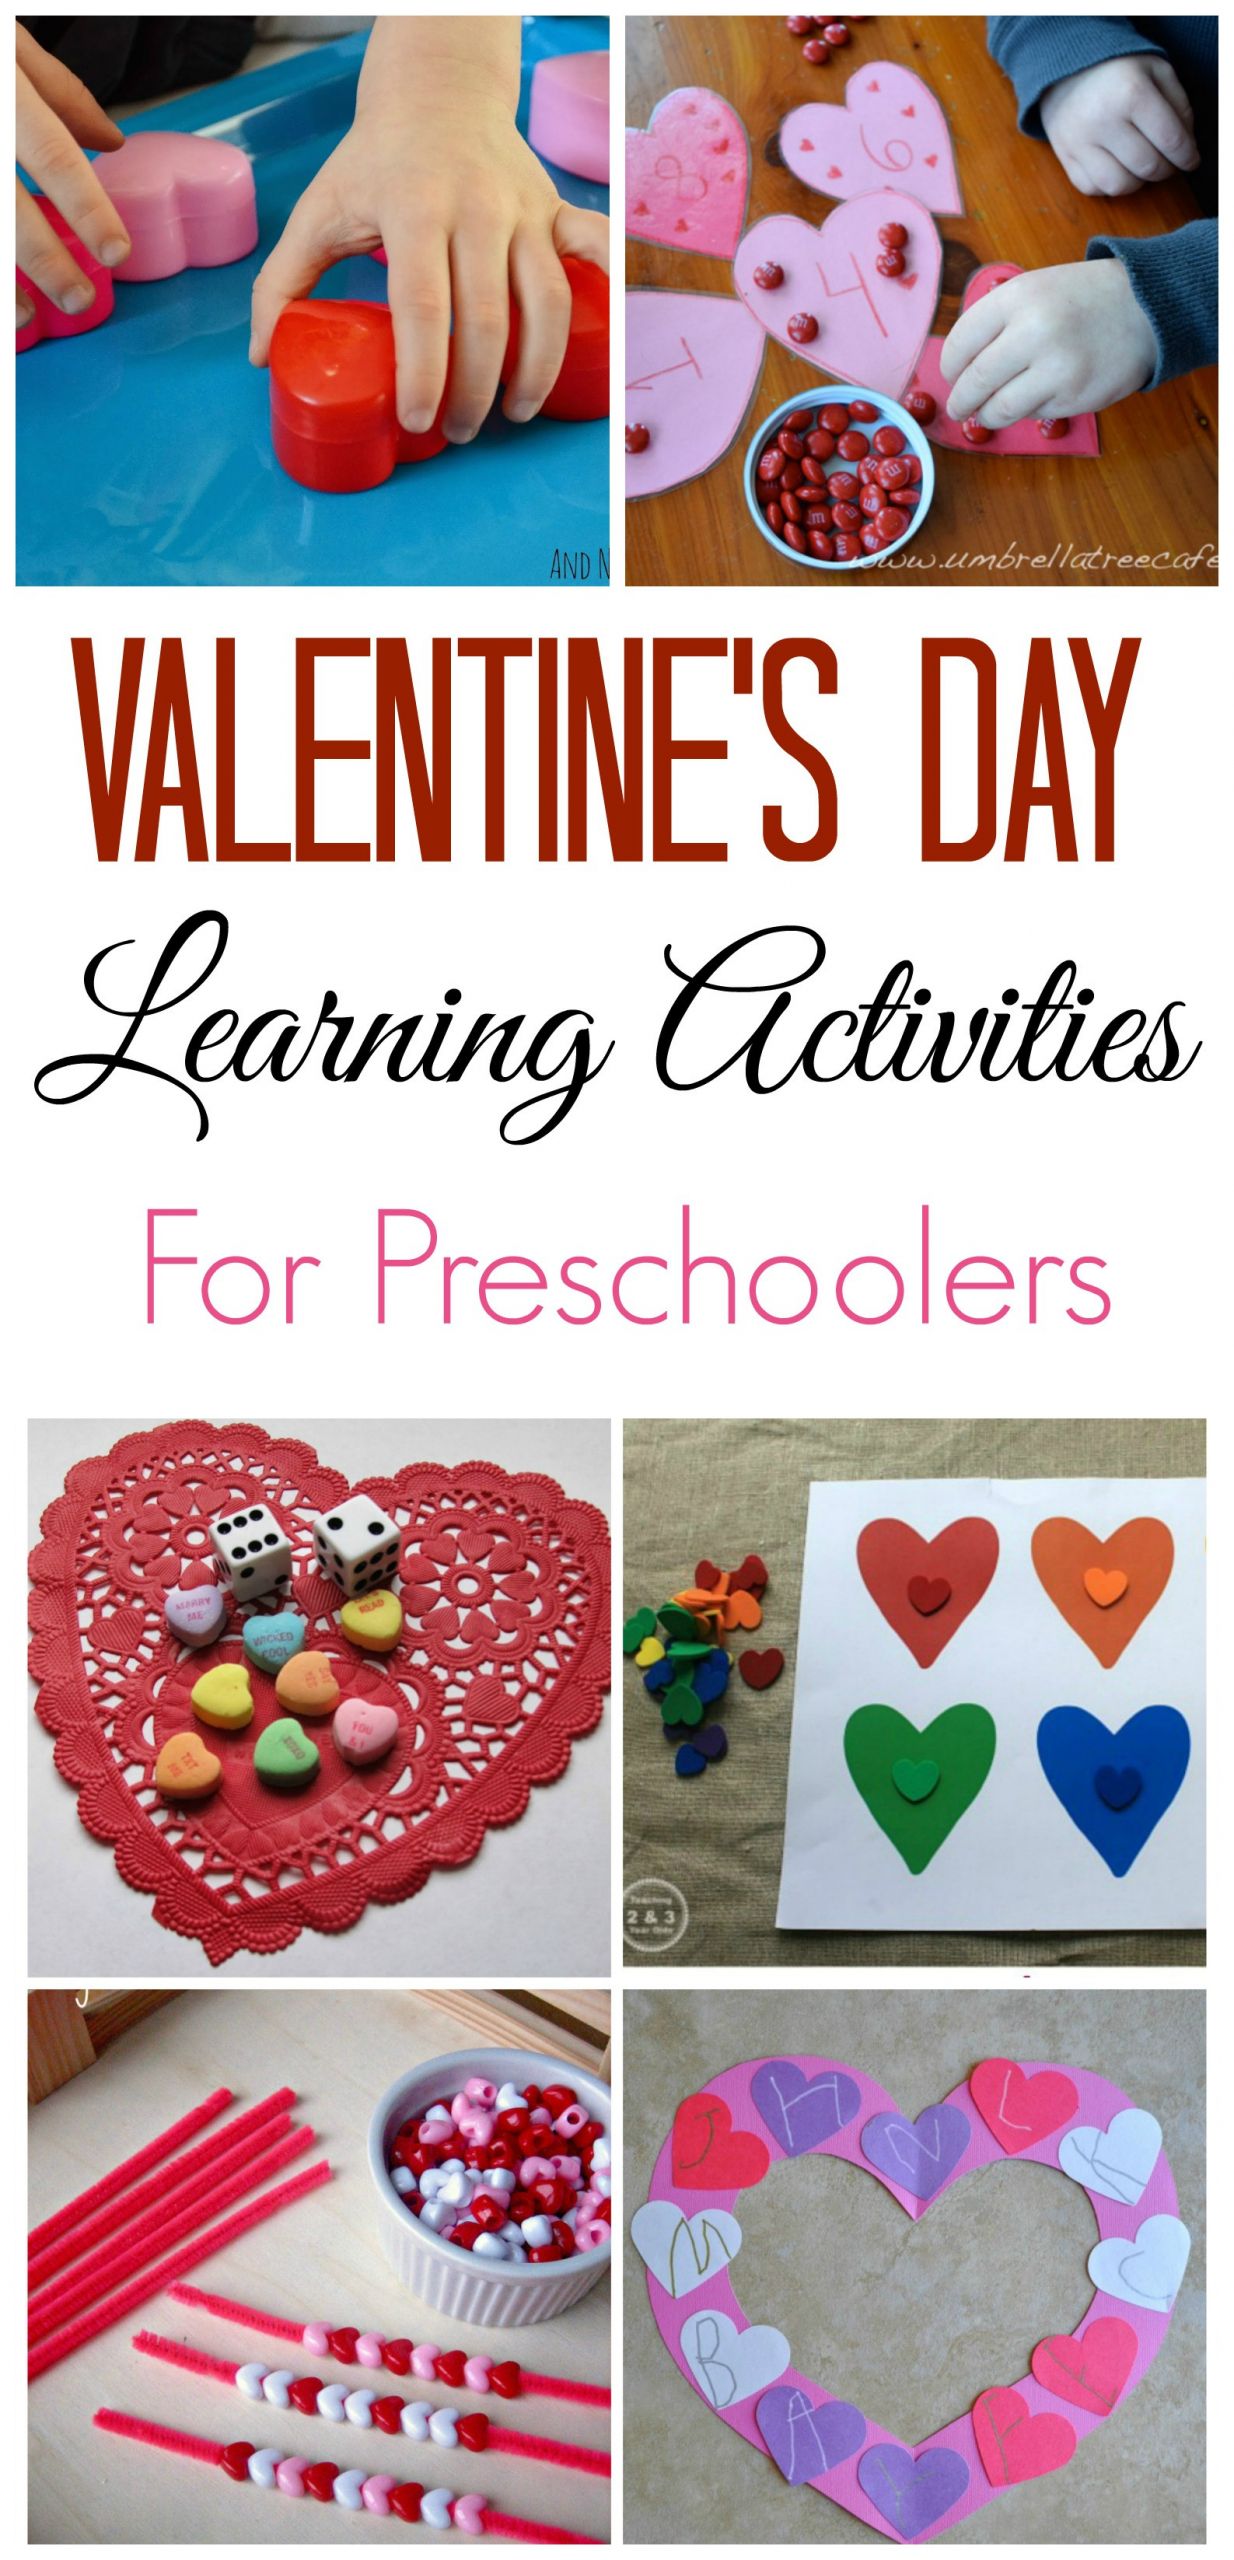 Valentines Day Events Ideas
 Valentine s Day Learning Activities for Preschoolers